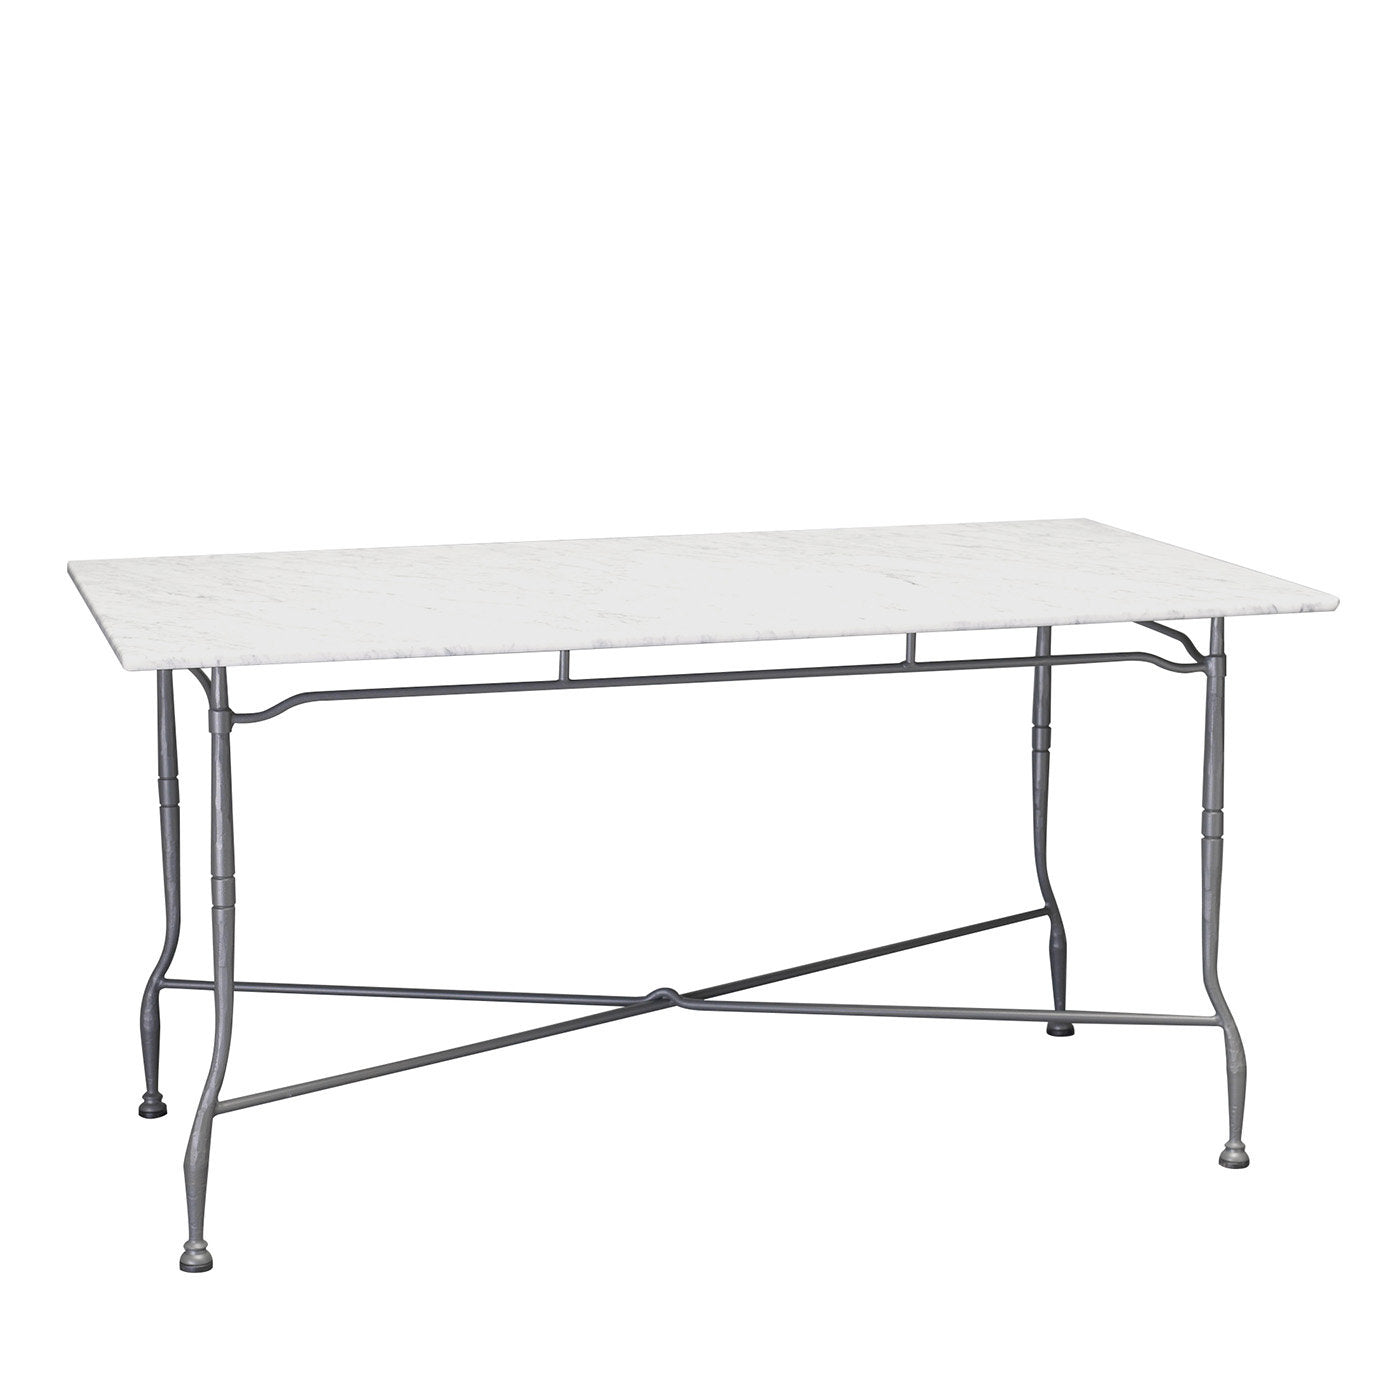 Intreccio Rectangular Dining Table in Stainless Steel - Main view